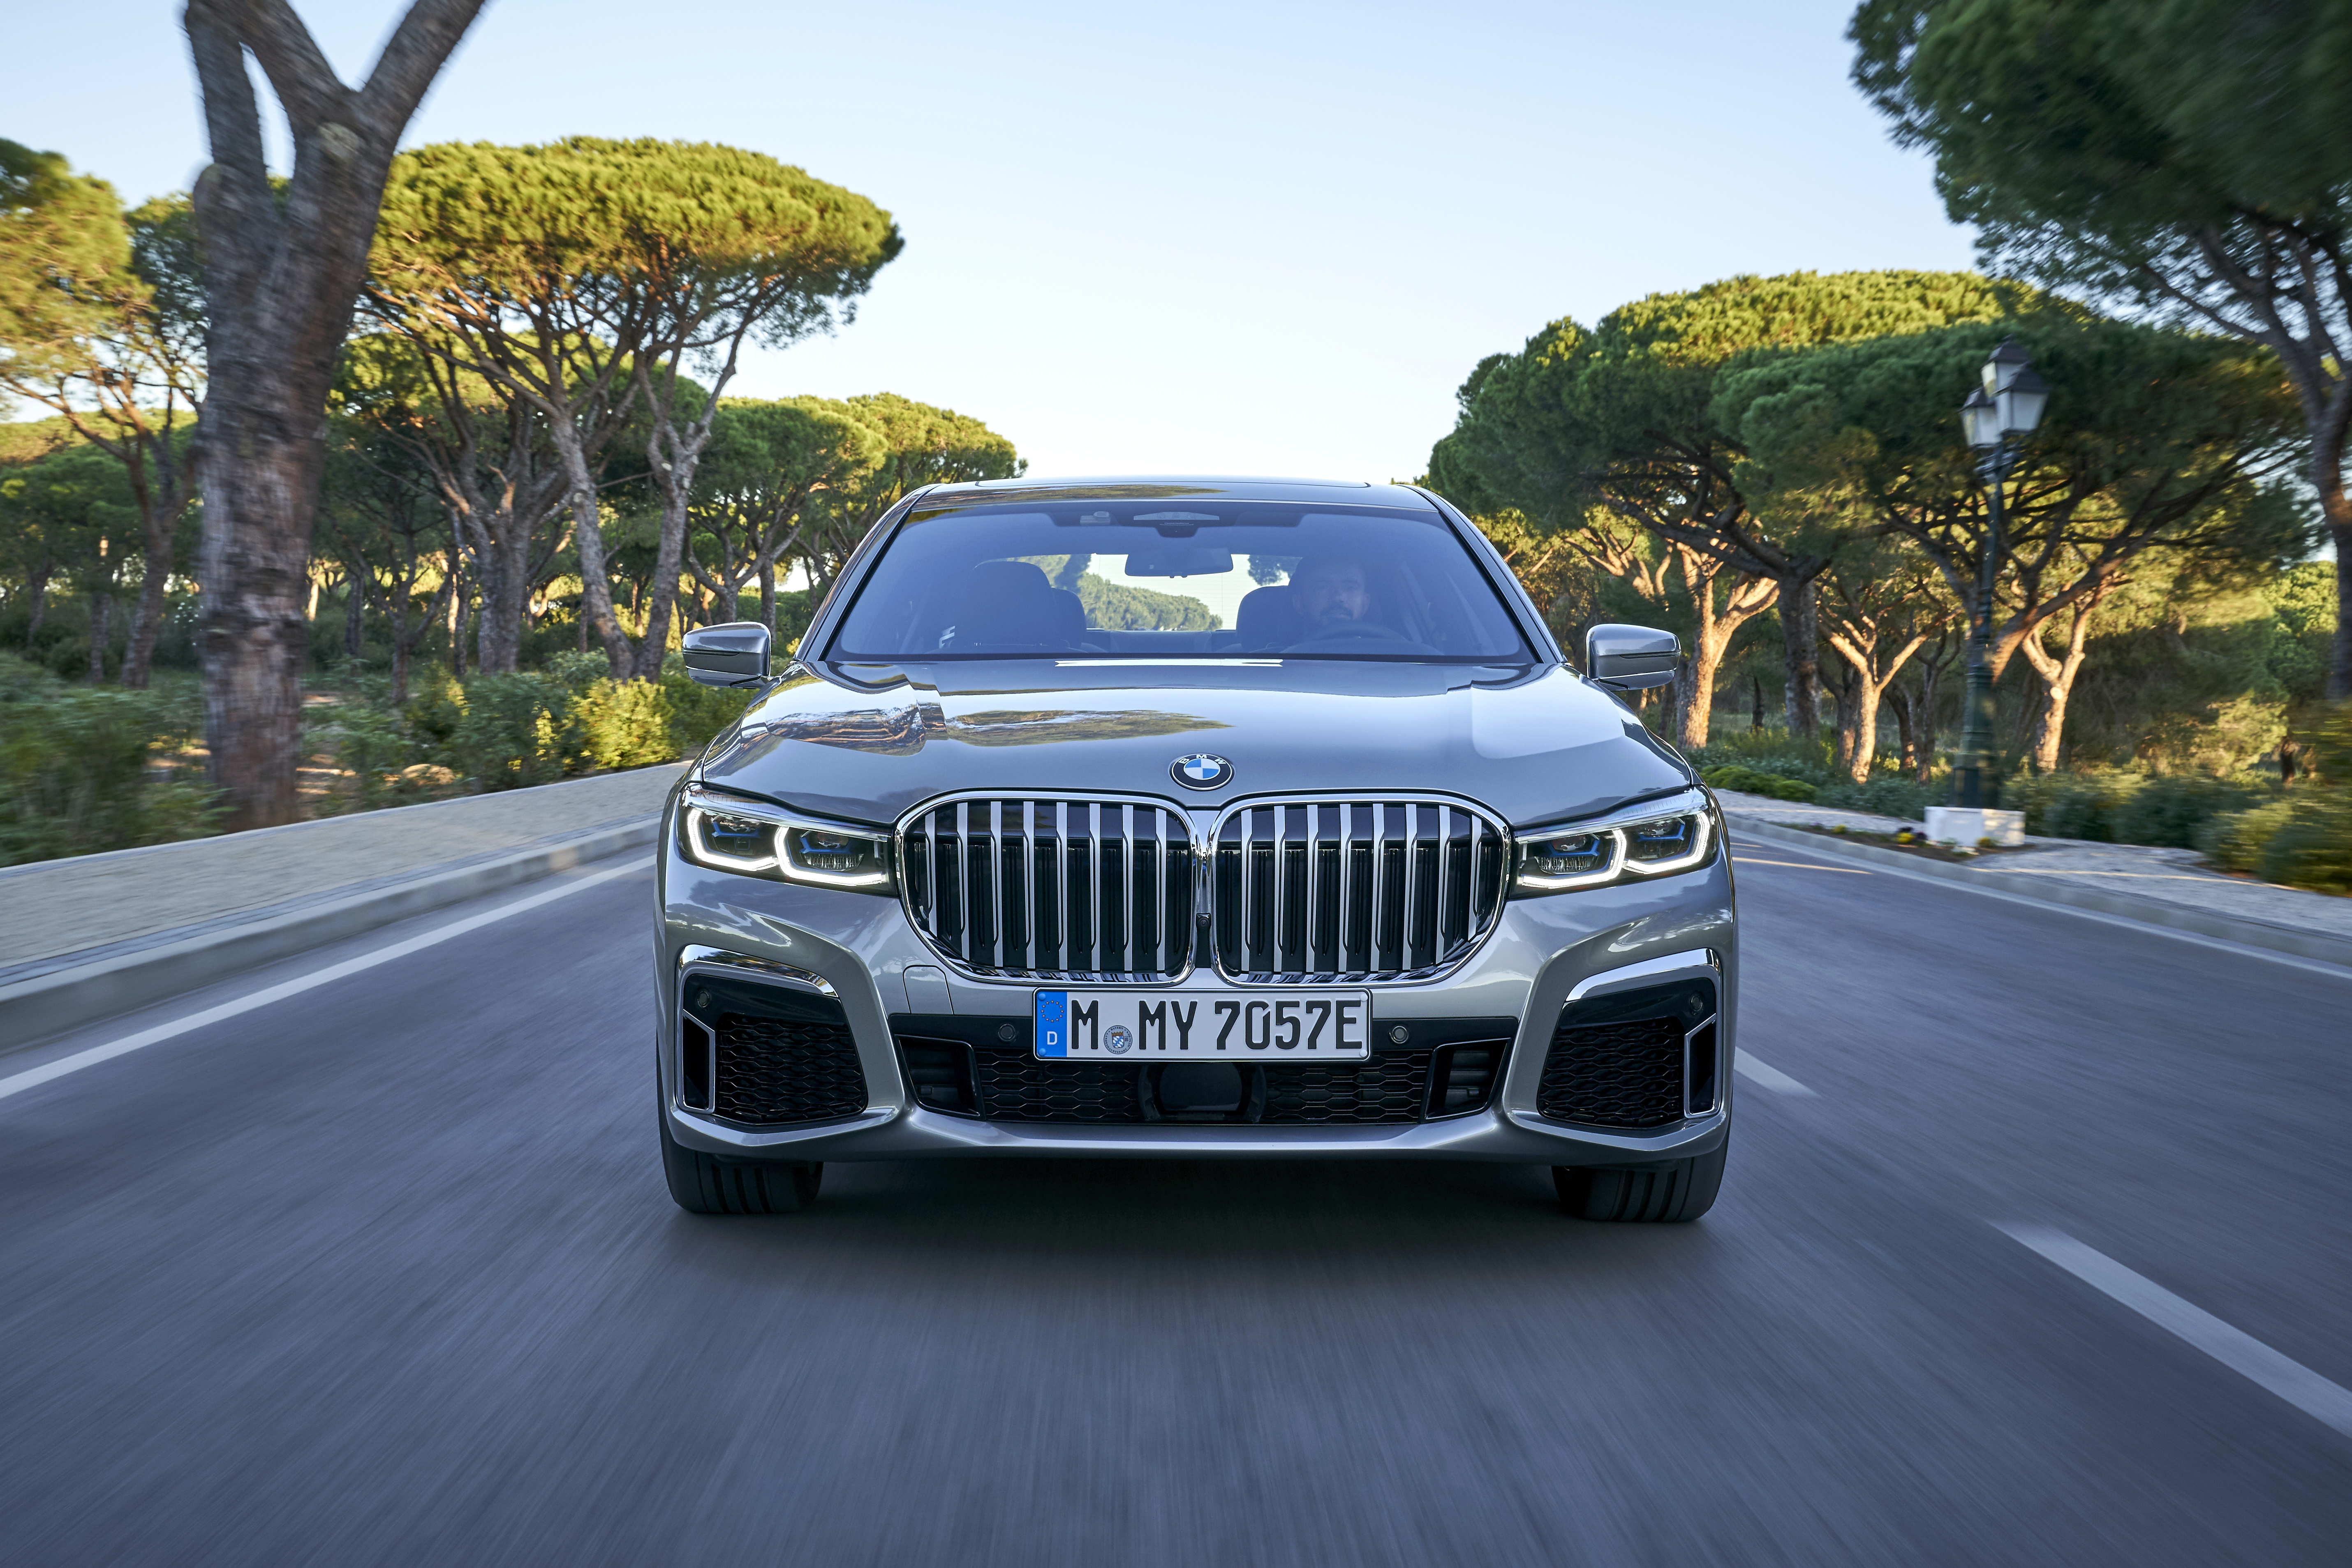 History of the BMW Kidney Grille Design From 1933 to 2021